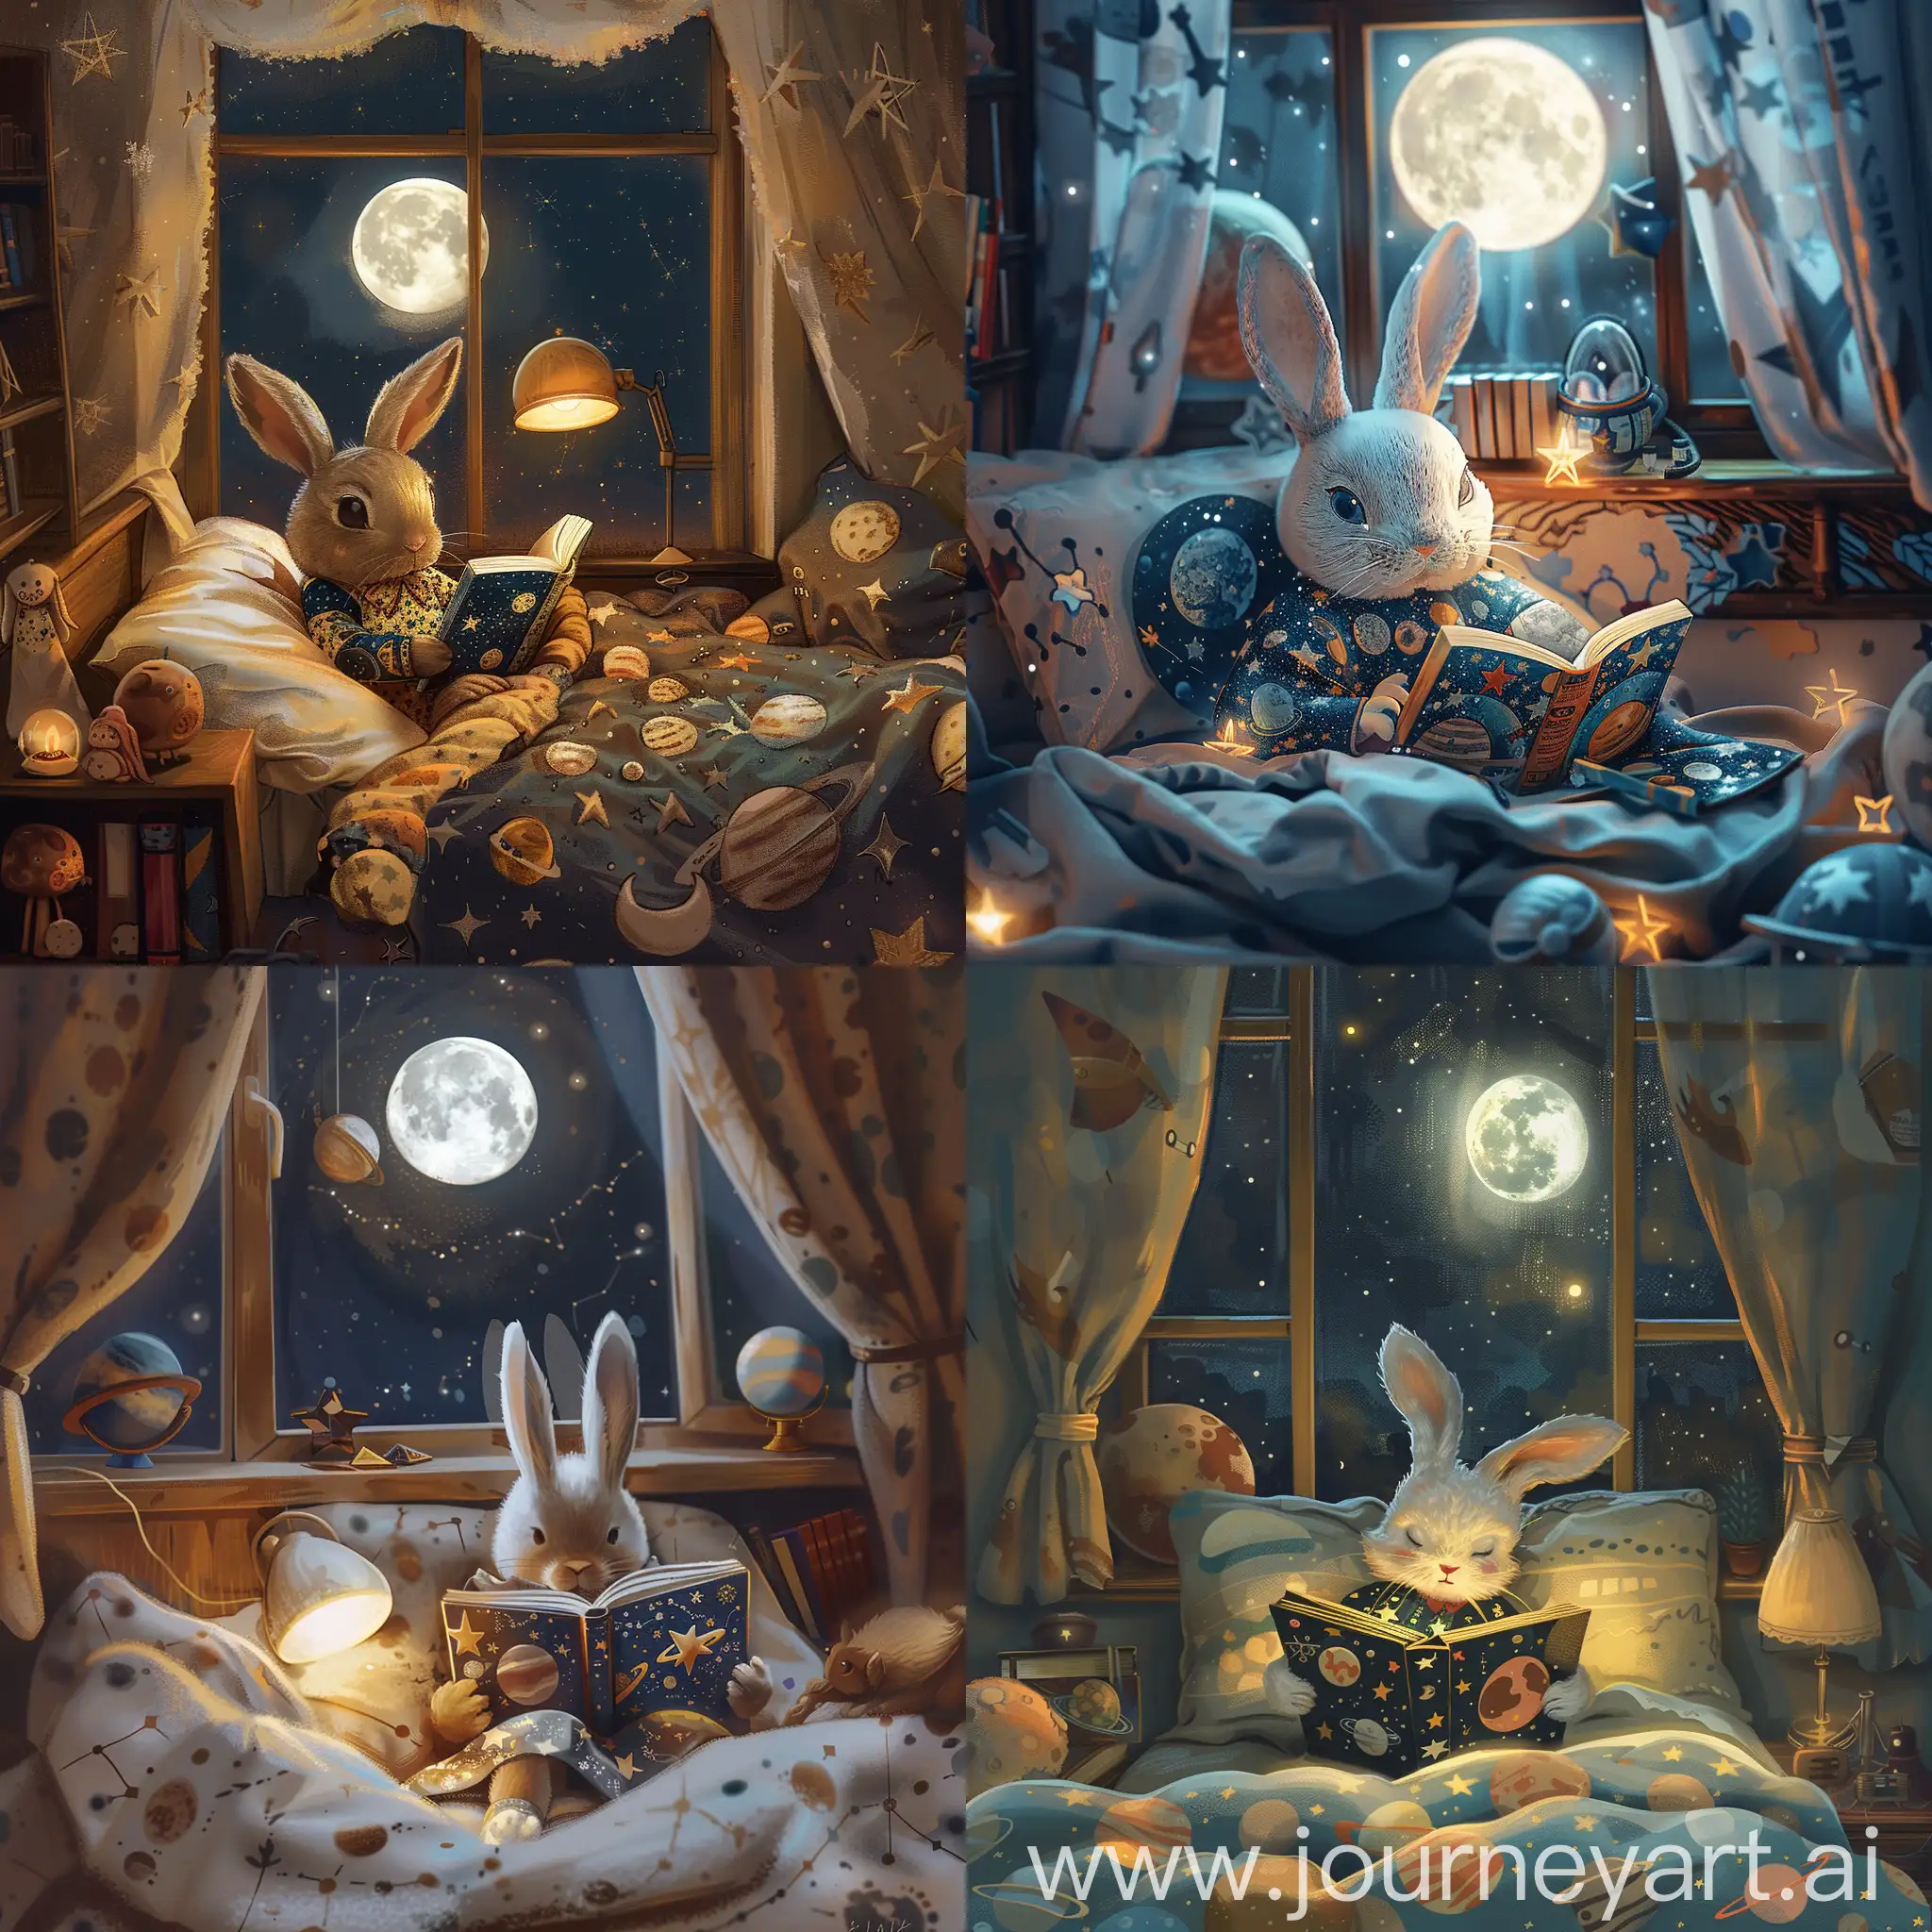 A cozy room at night. You can see the moon from the window. The bedlight is on and a cute bunny wearing a nightdress with stars and planets print. He is reading a story book tucked in bed under a warm blanket. The room is decorated with space and star themed objects. It's winter season and everything is cozy